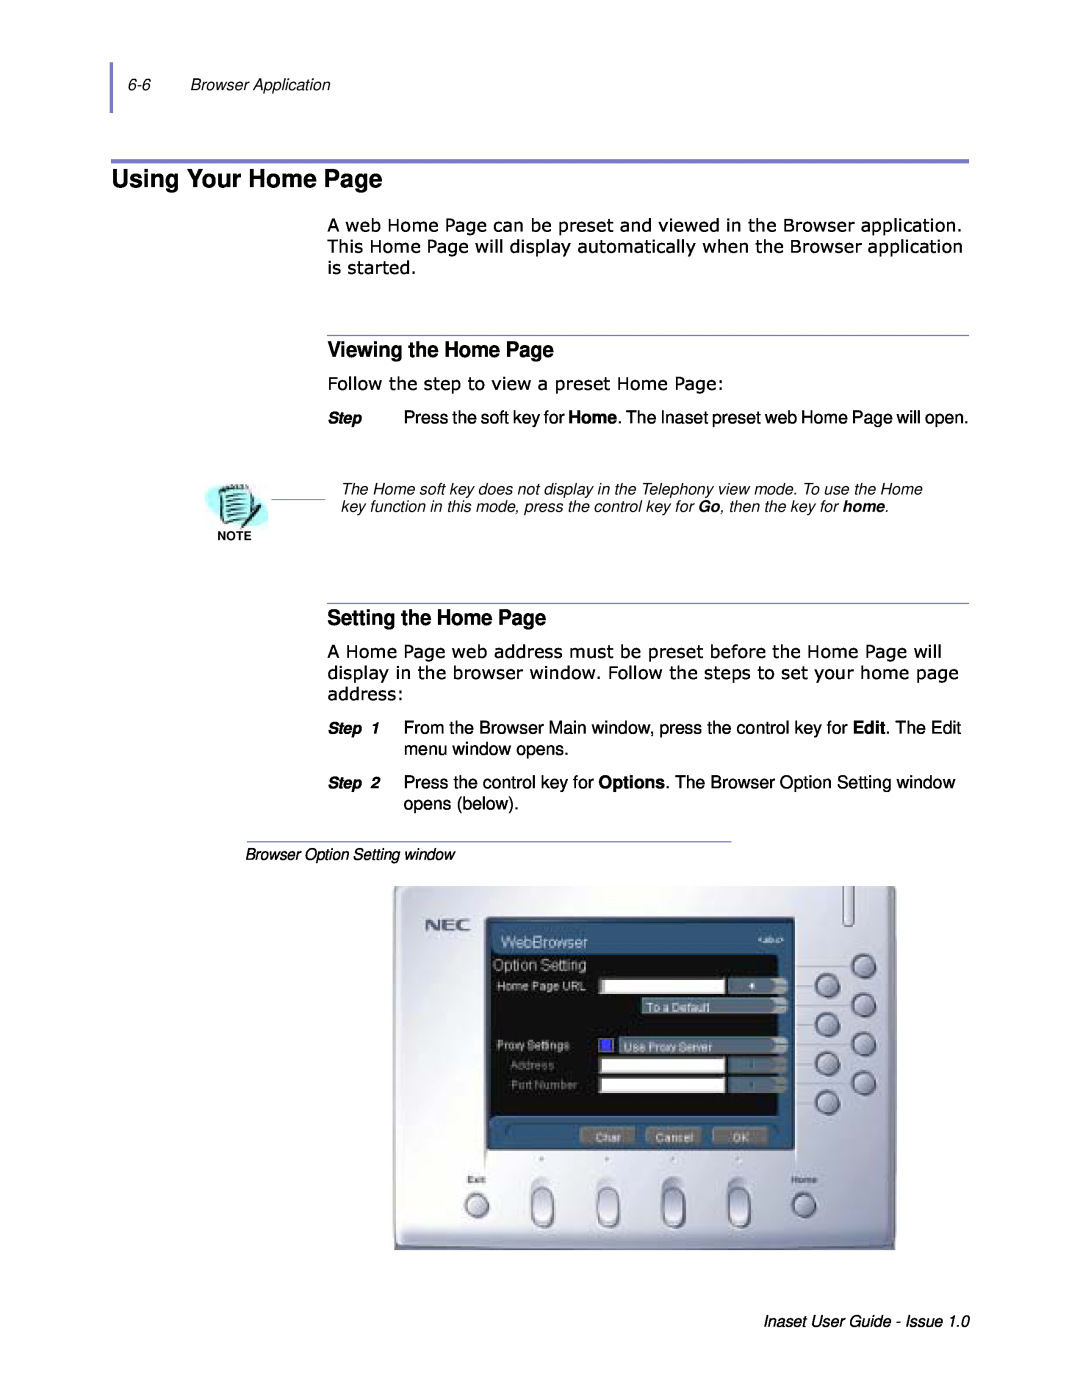 NEC NEAX 2000 IPS manual Using Your Home Page, Viewing the Home Page, Setting the Home Page 